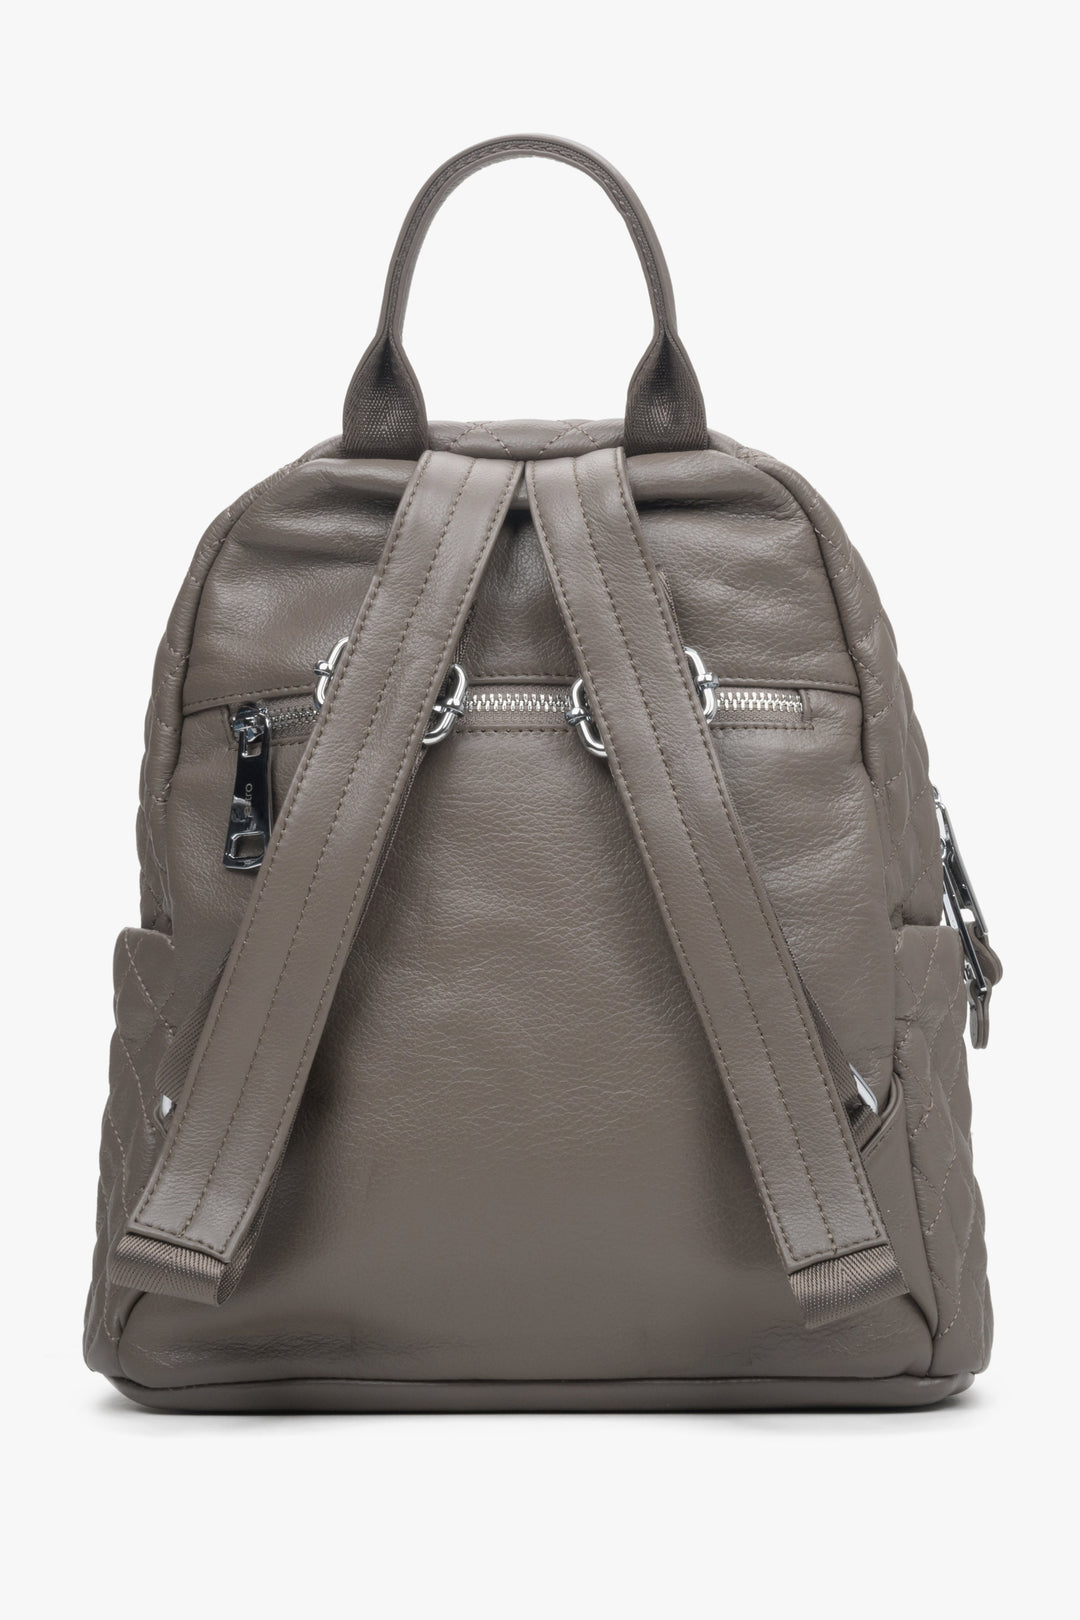 Women's dark grey urban backpack by Estro - close-up of the back.